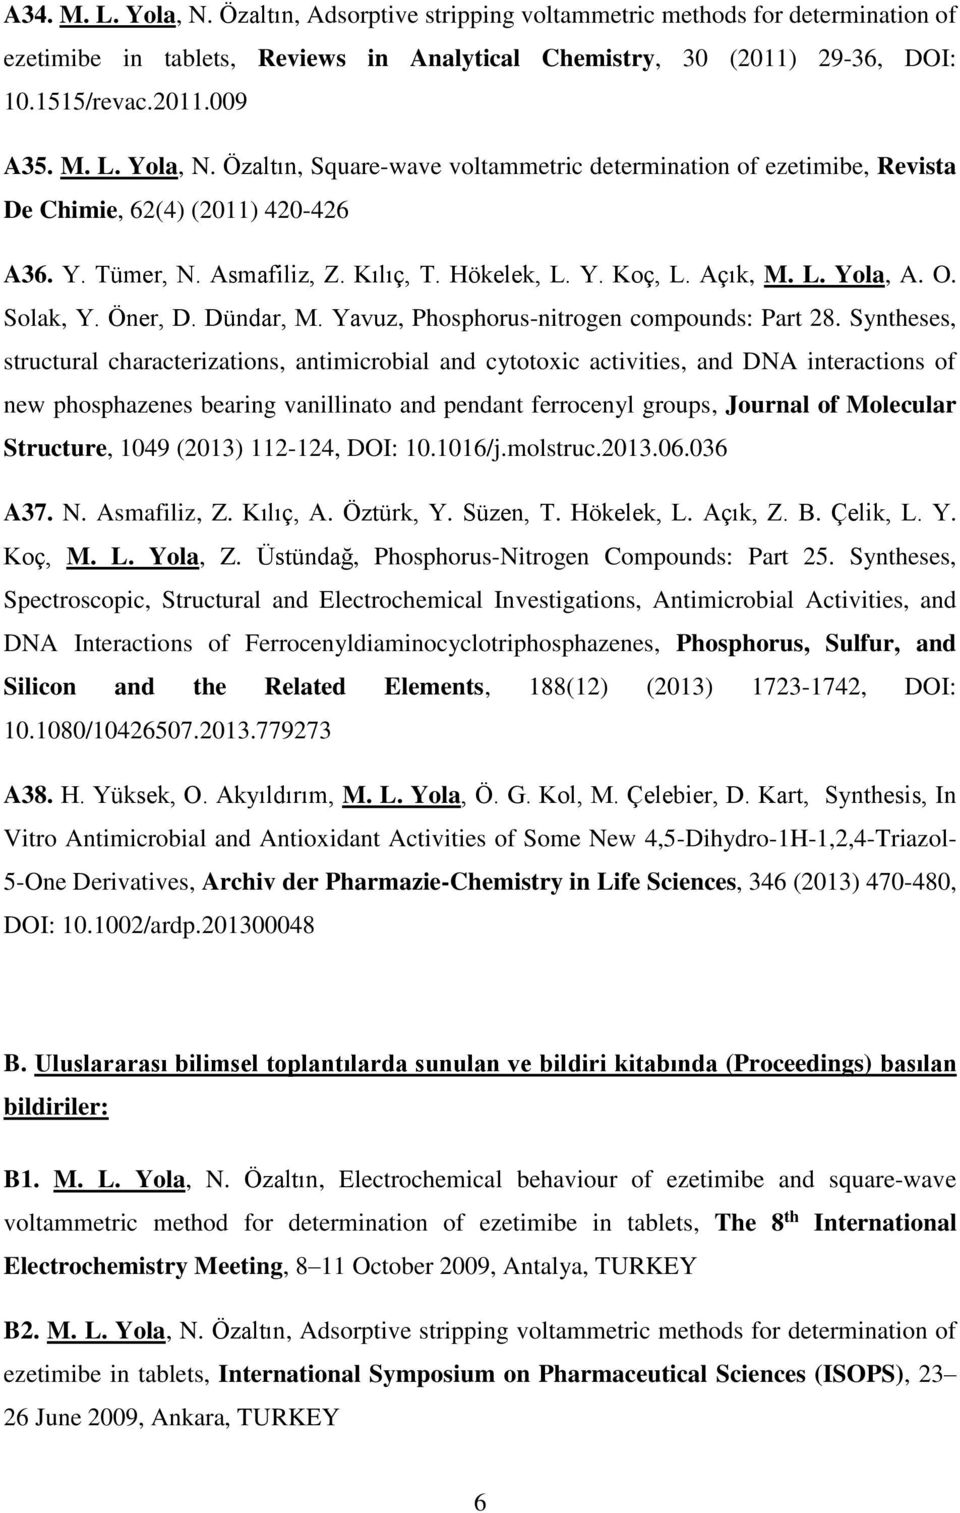 Syntheses, structural characterizations, antimicrobial and cytotoxic activities, and DNA interactions of new phosphazenes bearing vanillinato and pendant ferrocenyl groups, Journal of Molecular